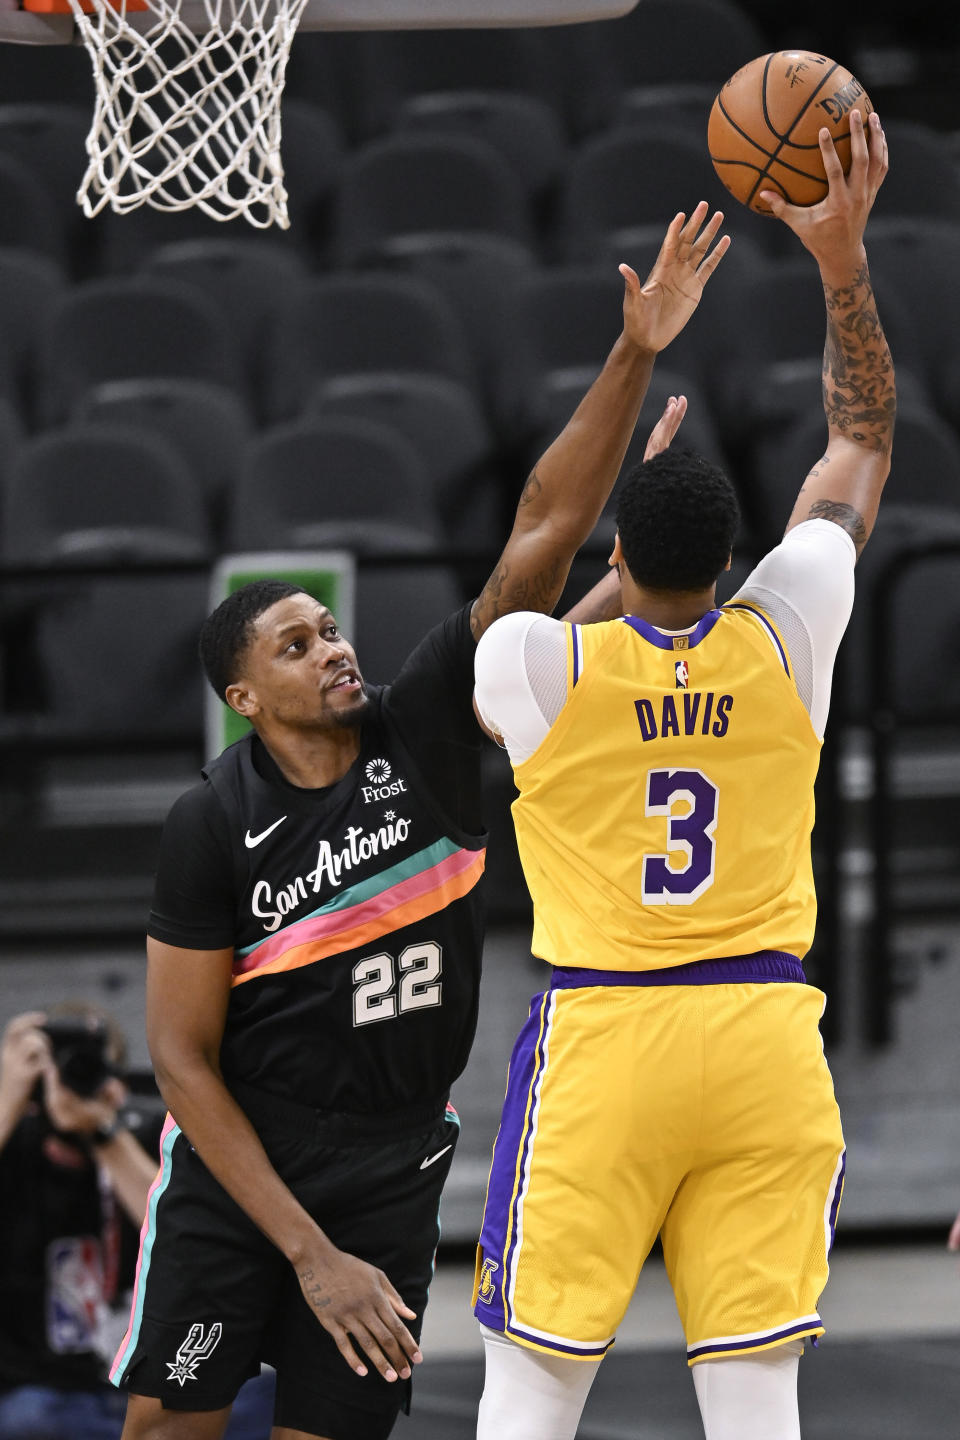 Los Angeles Lakers' Anthony Davis (3) shoots over San Antonio Spurs' Rudy Gay during the first half of an NBA basketball game Friday, Jan. 1, 2021, in San Antonio. (AP Photo/Darren Abate)